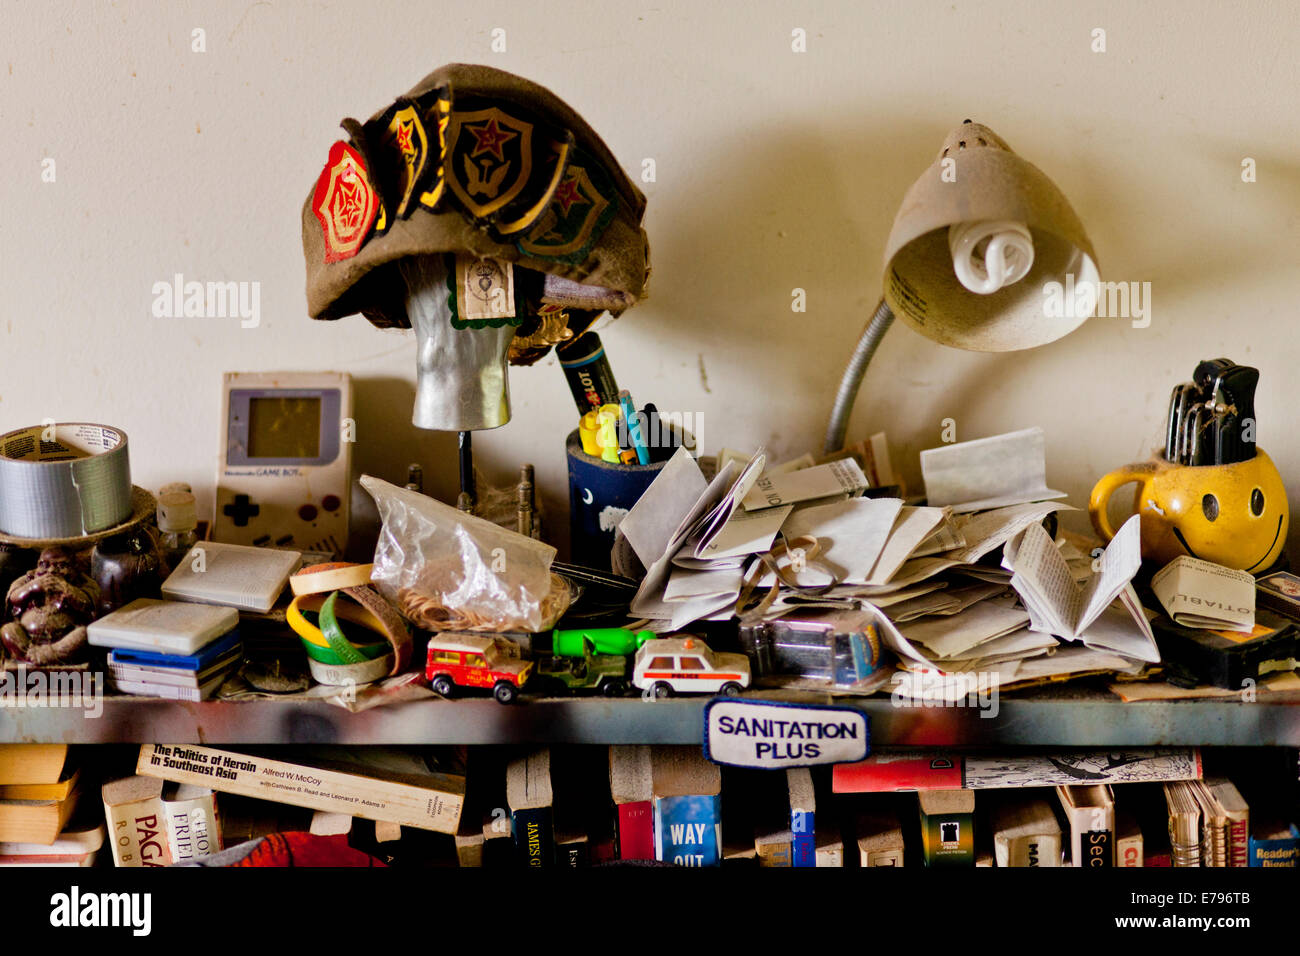 Cluttered shelf in a home Stock Photo